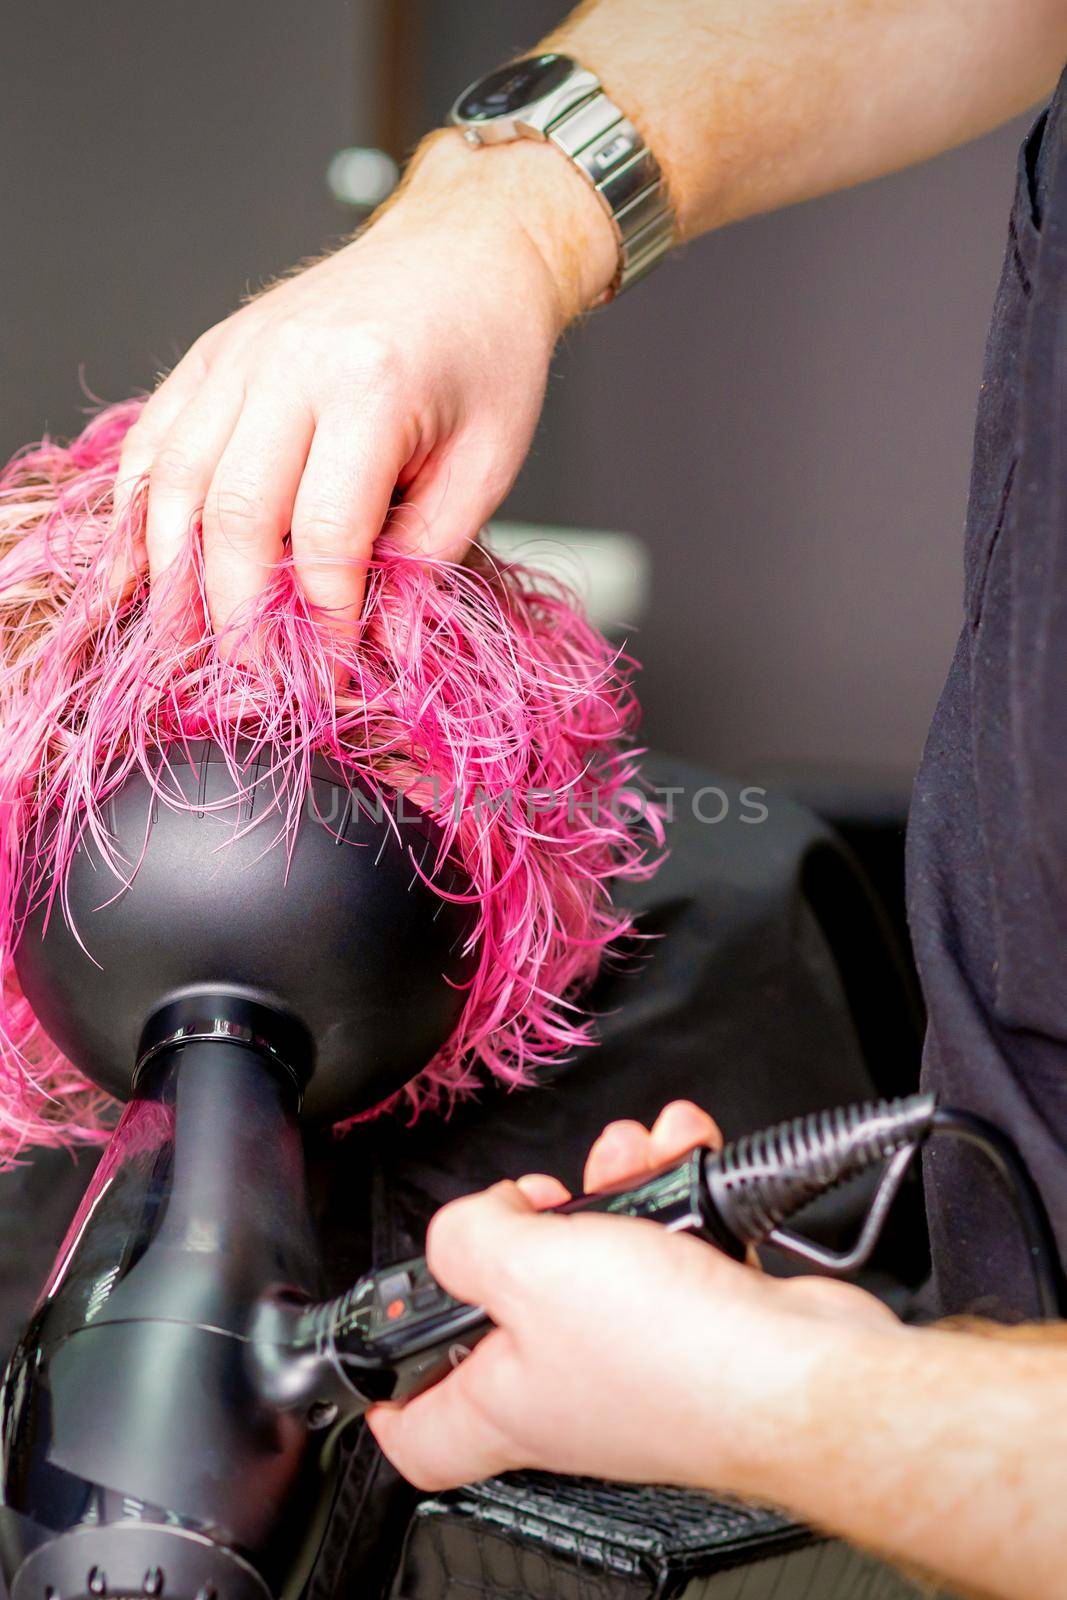 Hair Stylist making hairstyle using hair dryer blowing on wet custom pink hair at a beauty salon. by okskukuruza